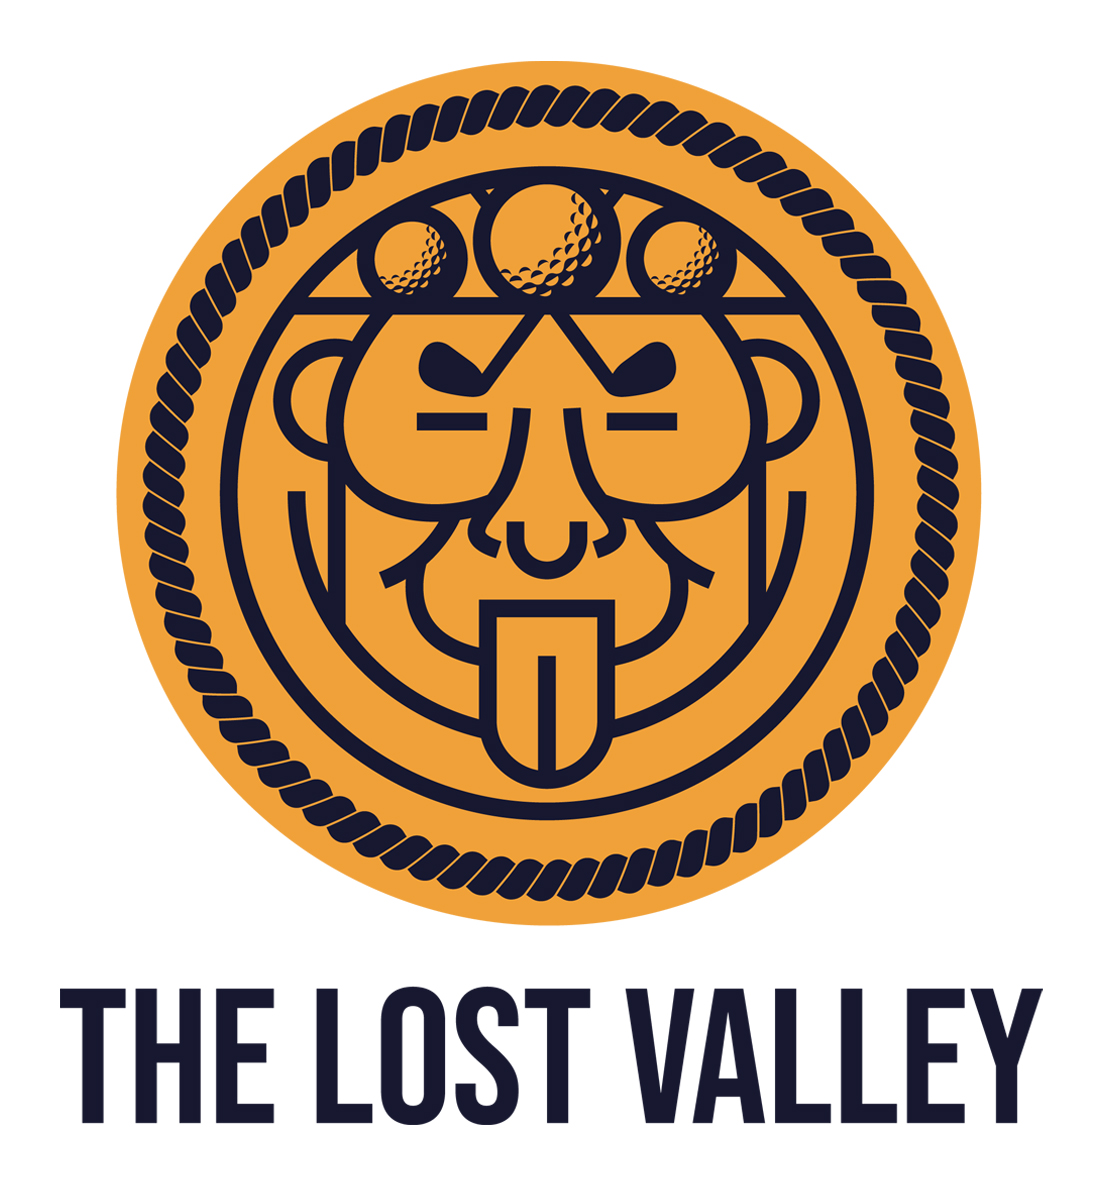 The Lost Valley Award